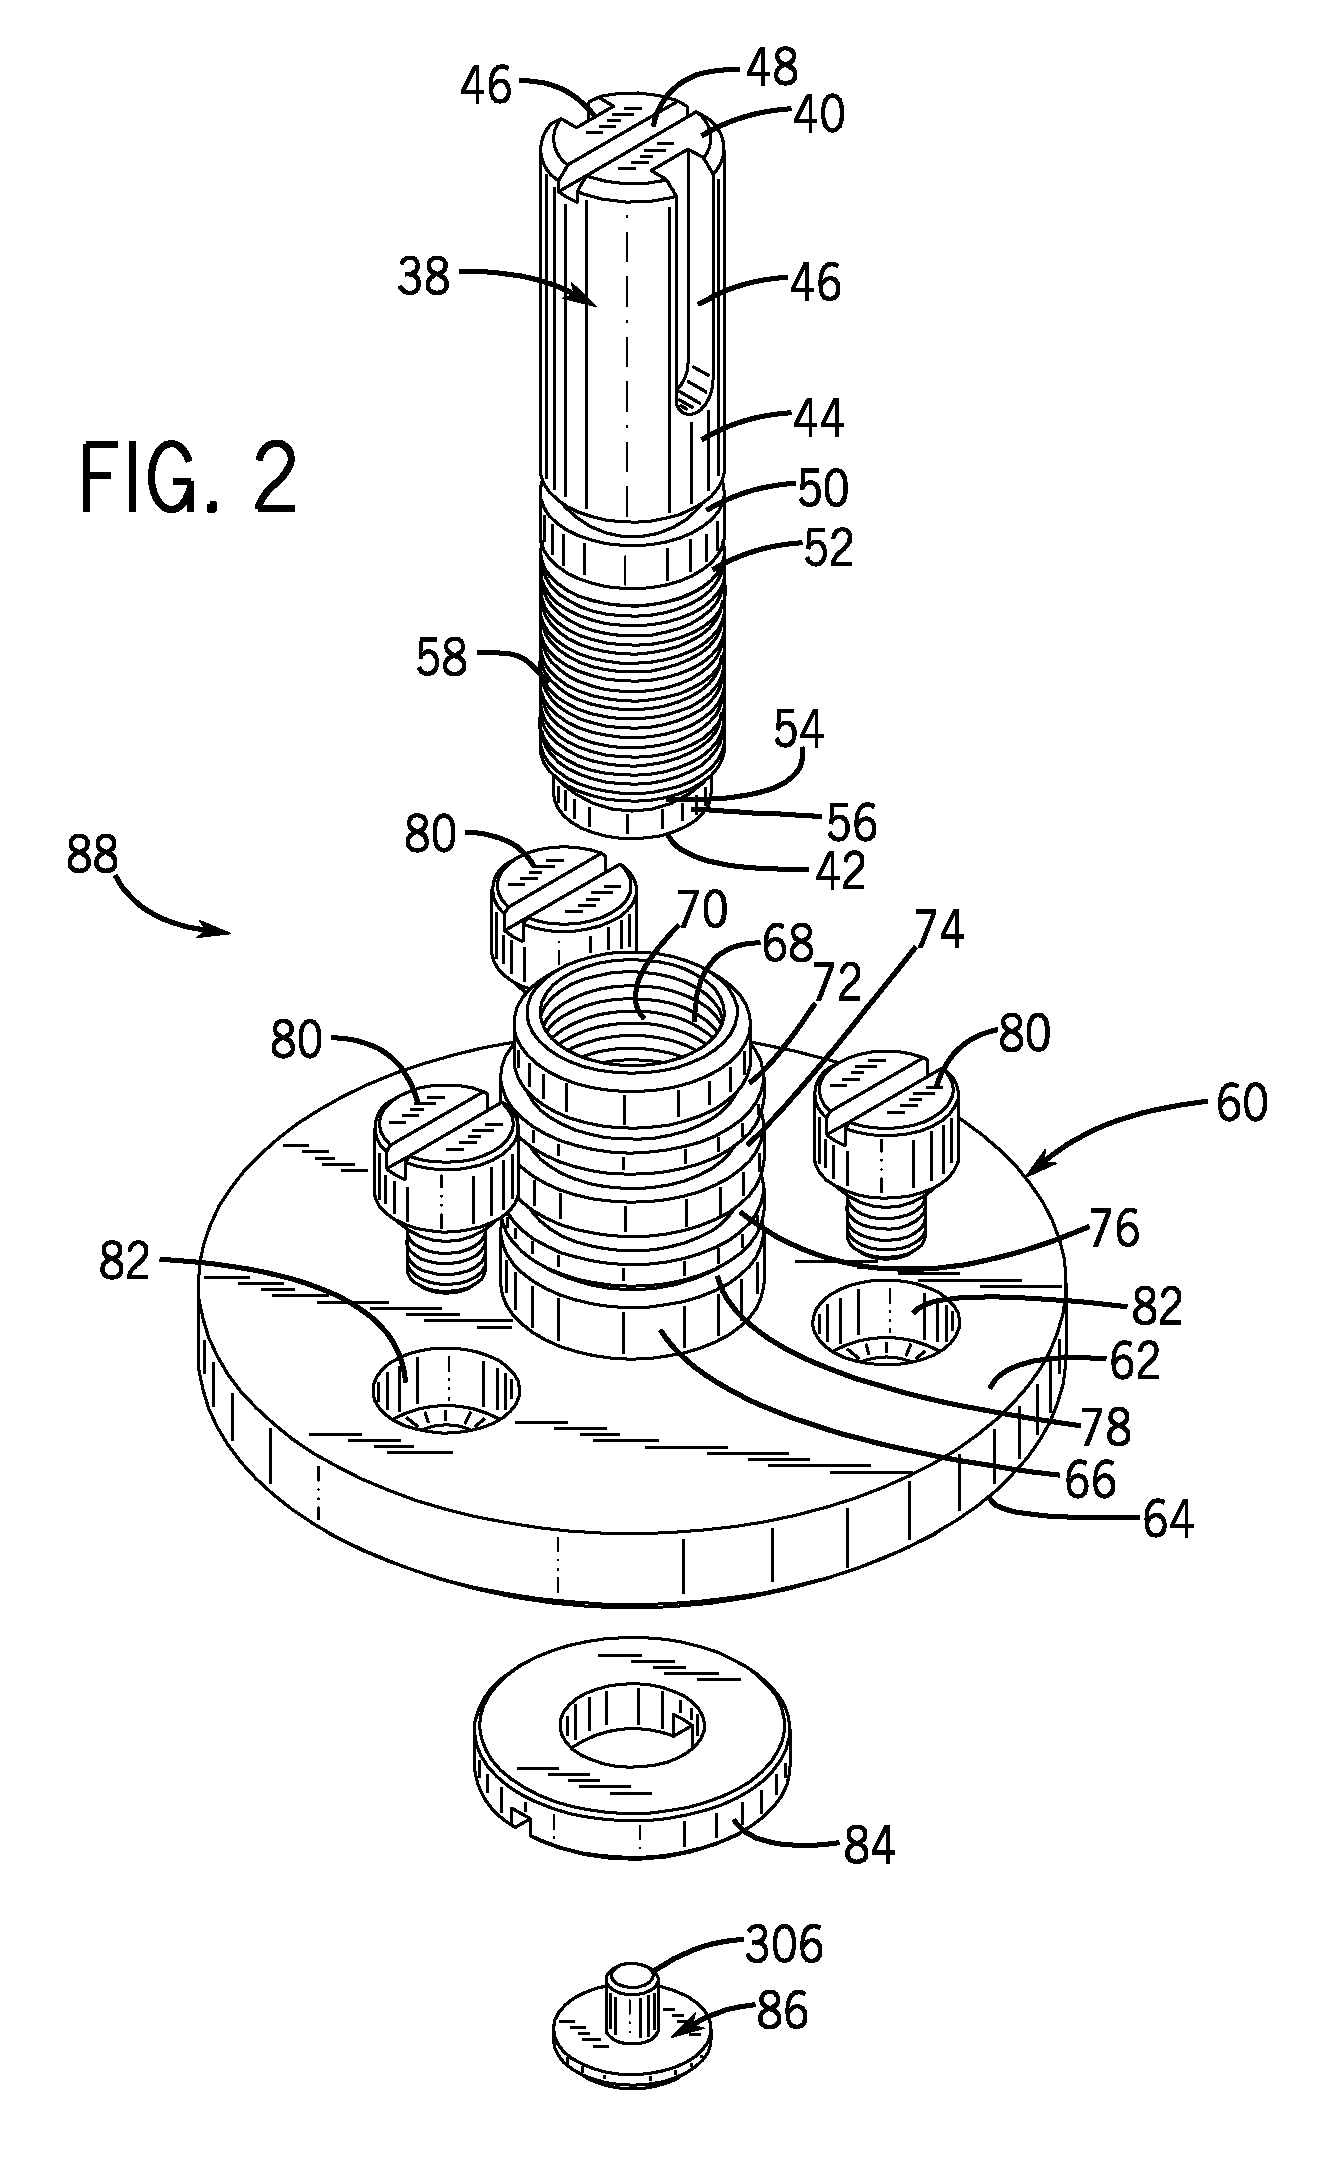 Rifle scope turret with spiral cam mechanism